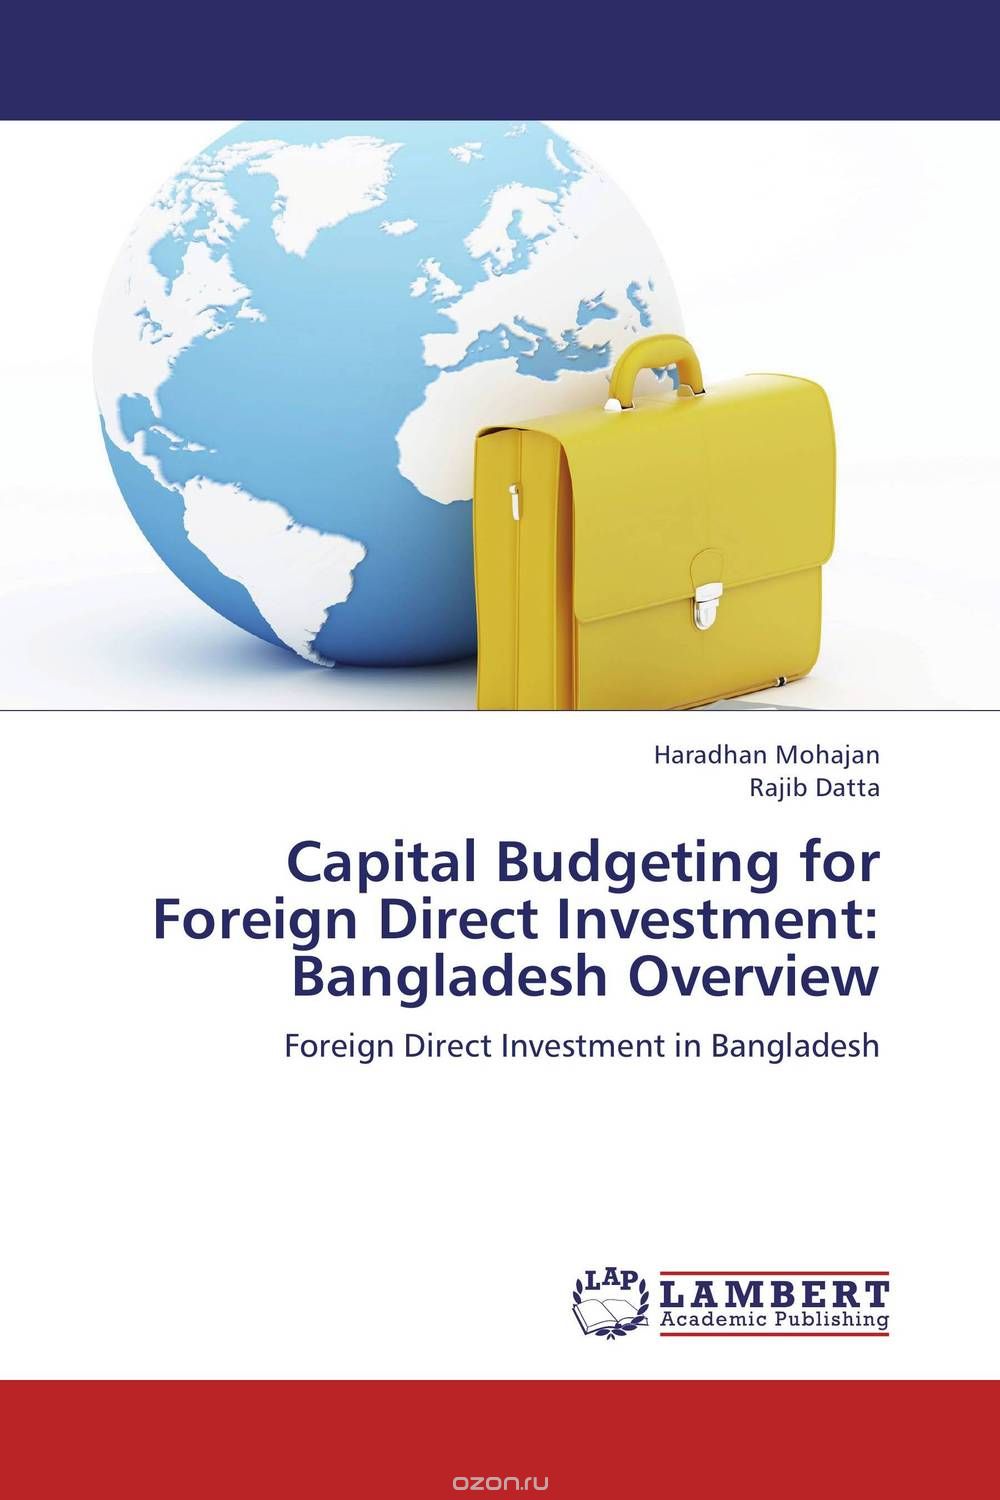 Скачать книгу "Capital Budgeting for Foreign Direct Investment: Bangladesh Overview"